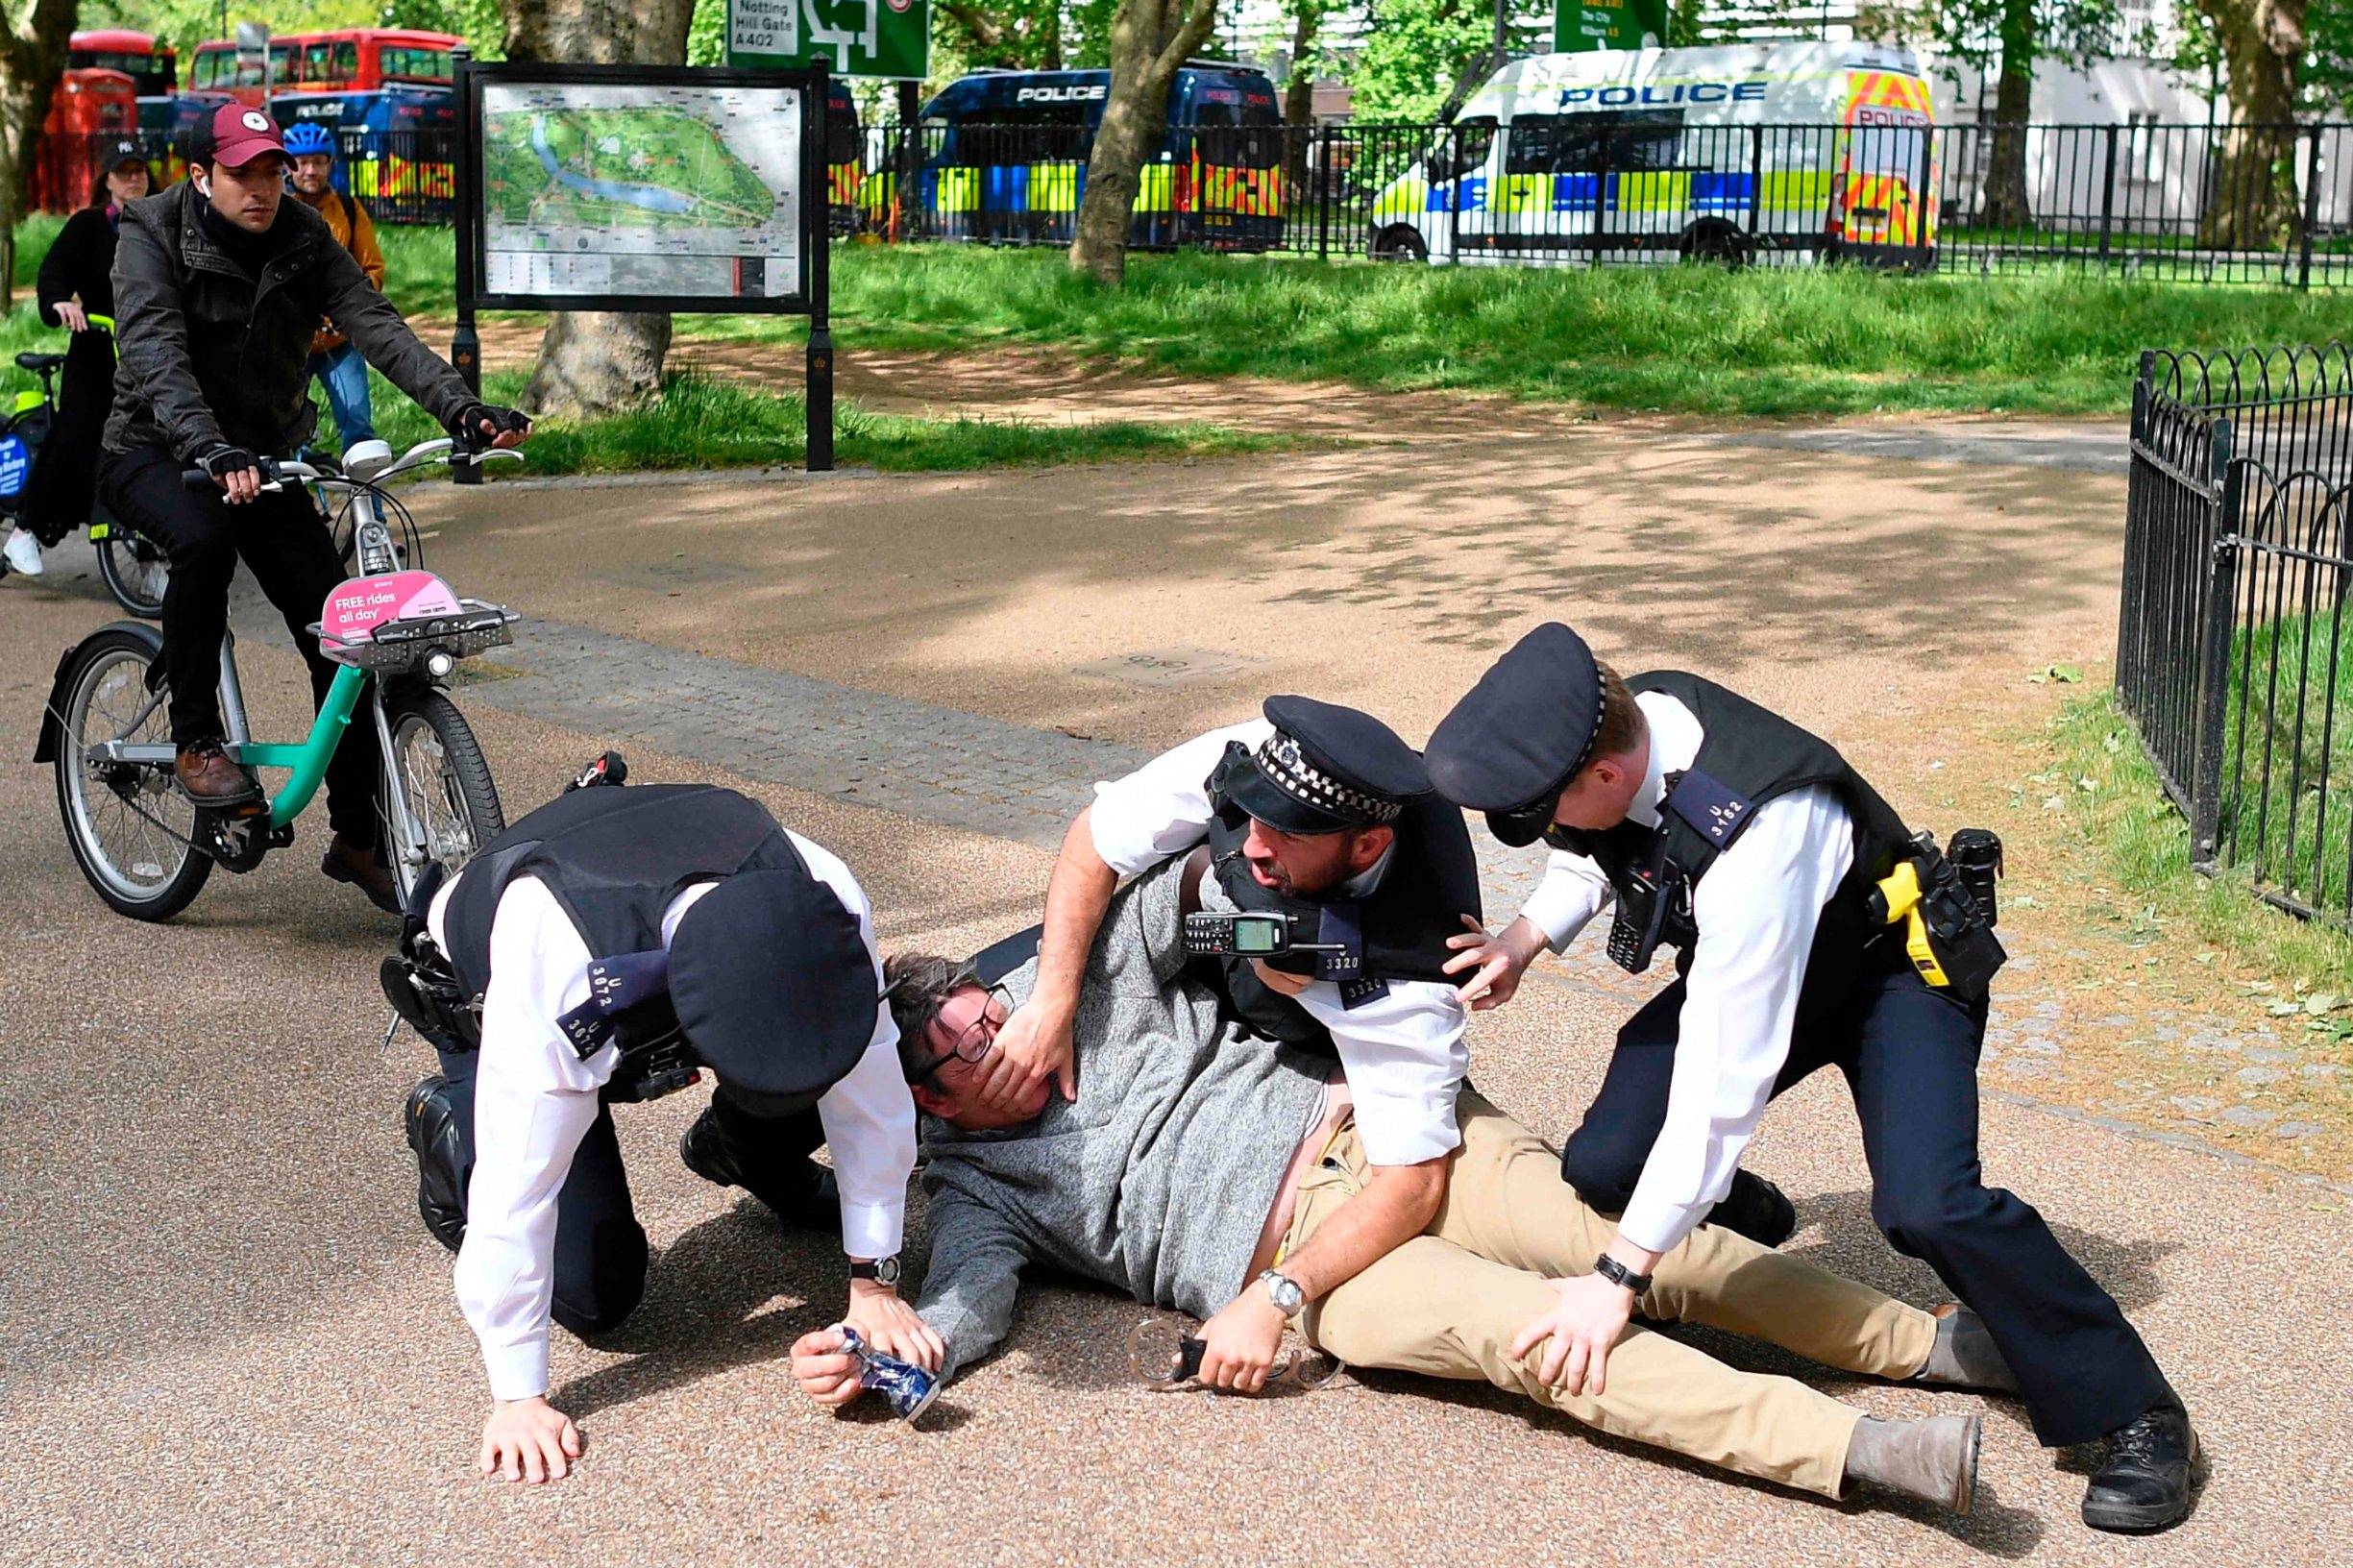 Police officers struggle to detain a man who refused to disperse from Hyde Park in London on May 16, 2020, following an easing of lockdown rules in England during the novel coronavirus COVID-19 pandemic. - People are being asked to 